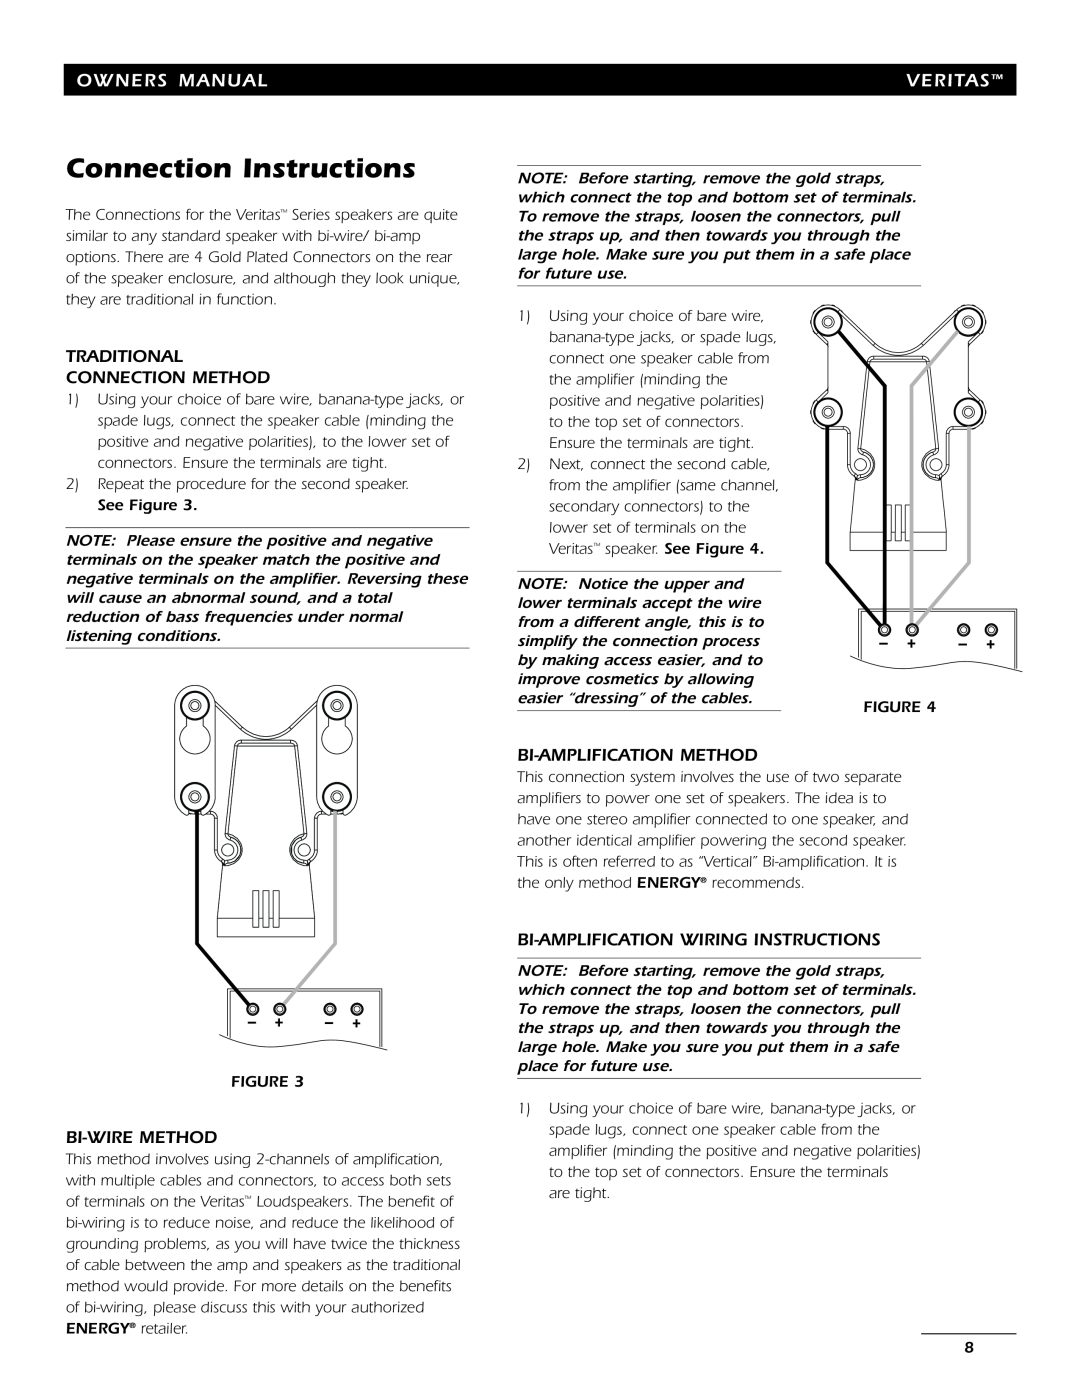 Energy Speaker Systems 7AI Connection Instructions, Traditional Connection Method, Bi-Wiremethod, Bi-Amplificationmethod 